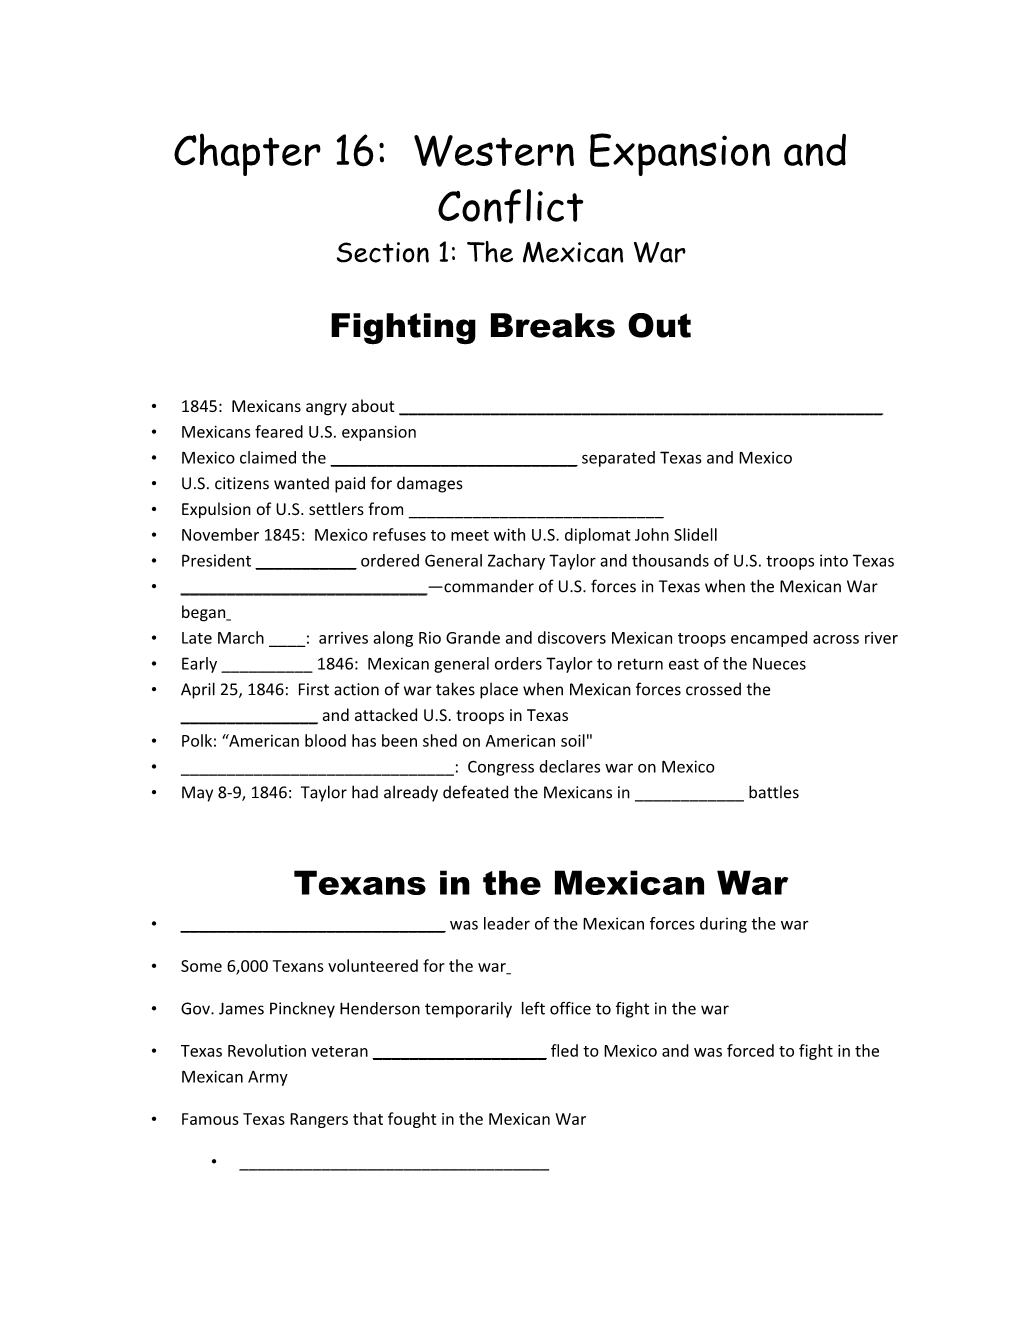 Chapter 16: Western Expansion and Conflict